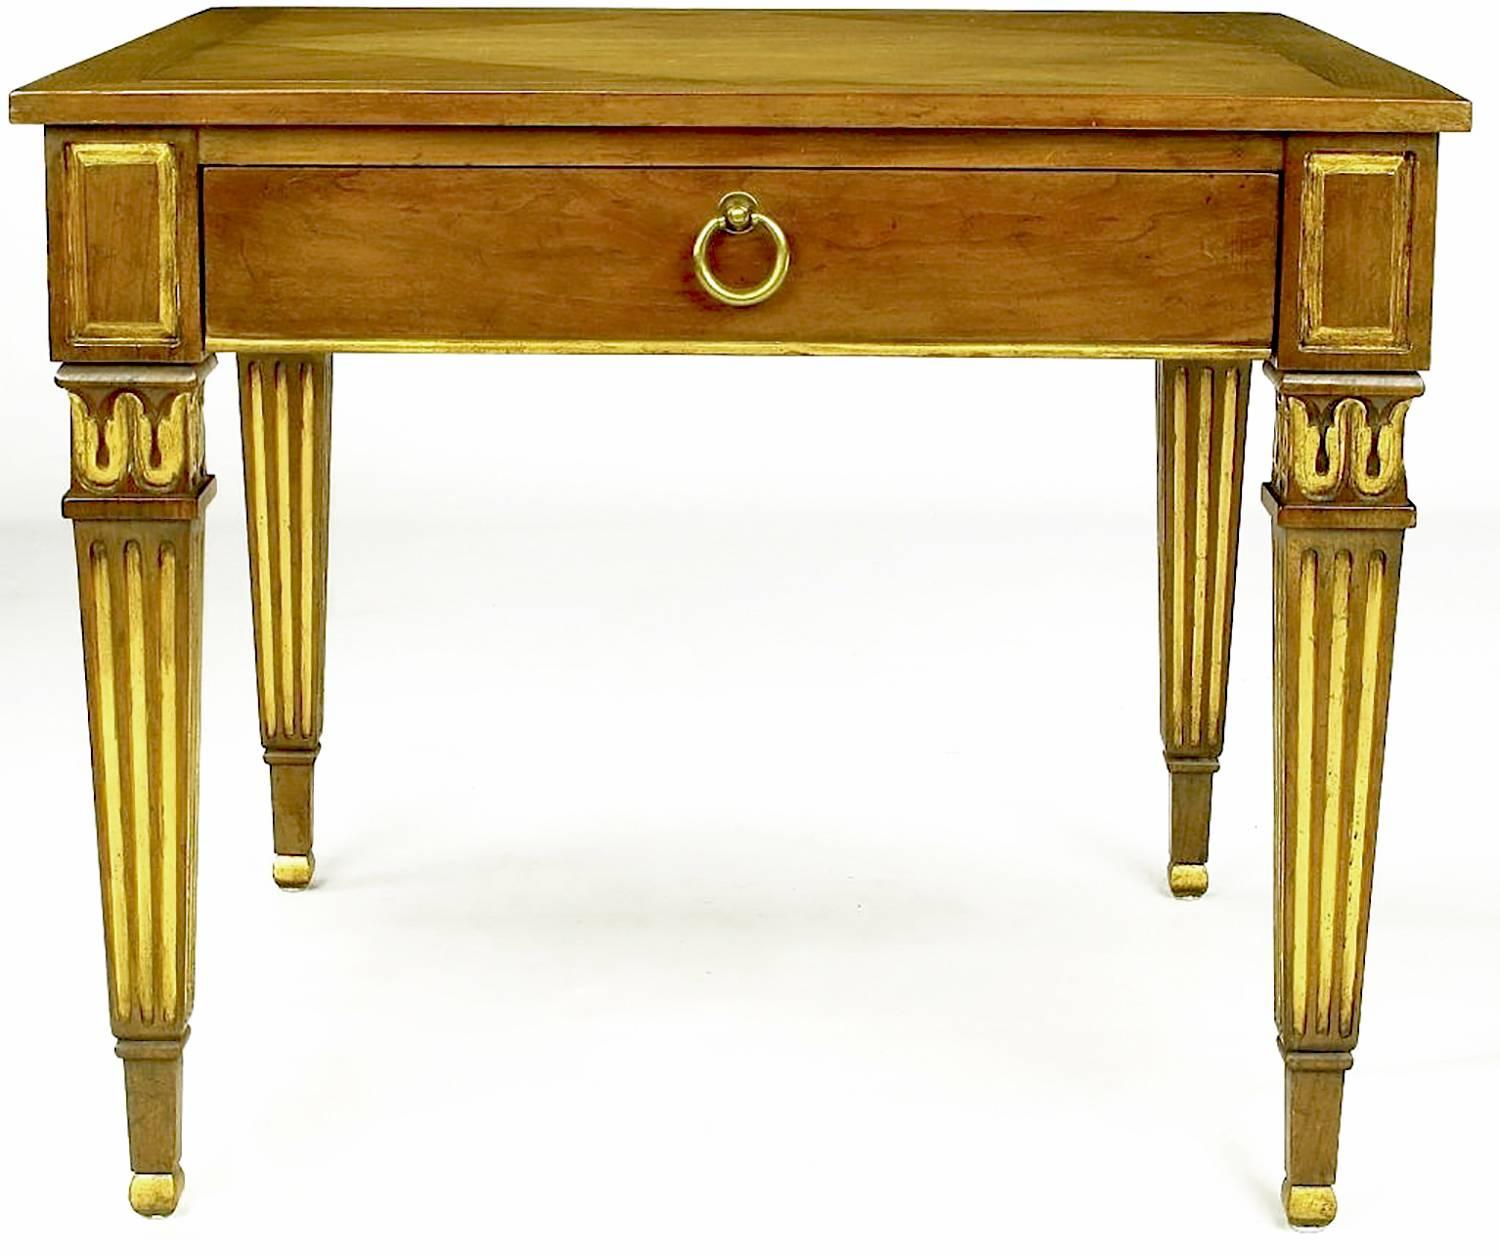 These outstanding walnut side tables from Baker feature diamond pattern parquetry inlaid tops and parcel-gilt fluted Louis XVI style legs. A single drawer is accessed by a brass drop ring pull. An exquisitely designed pair.